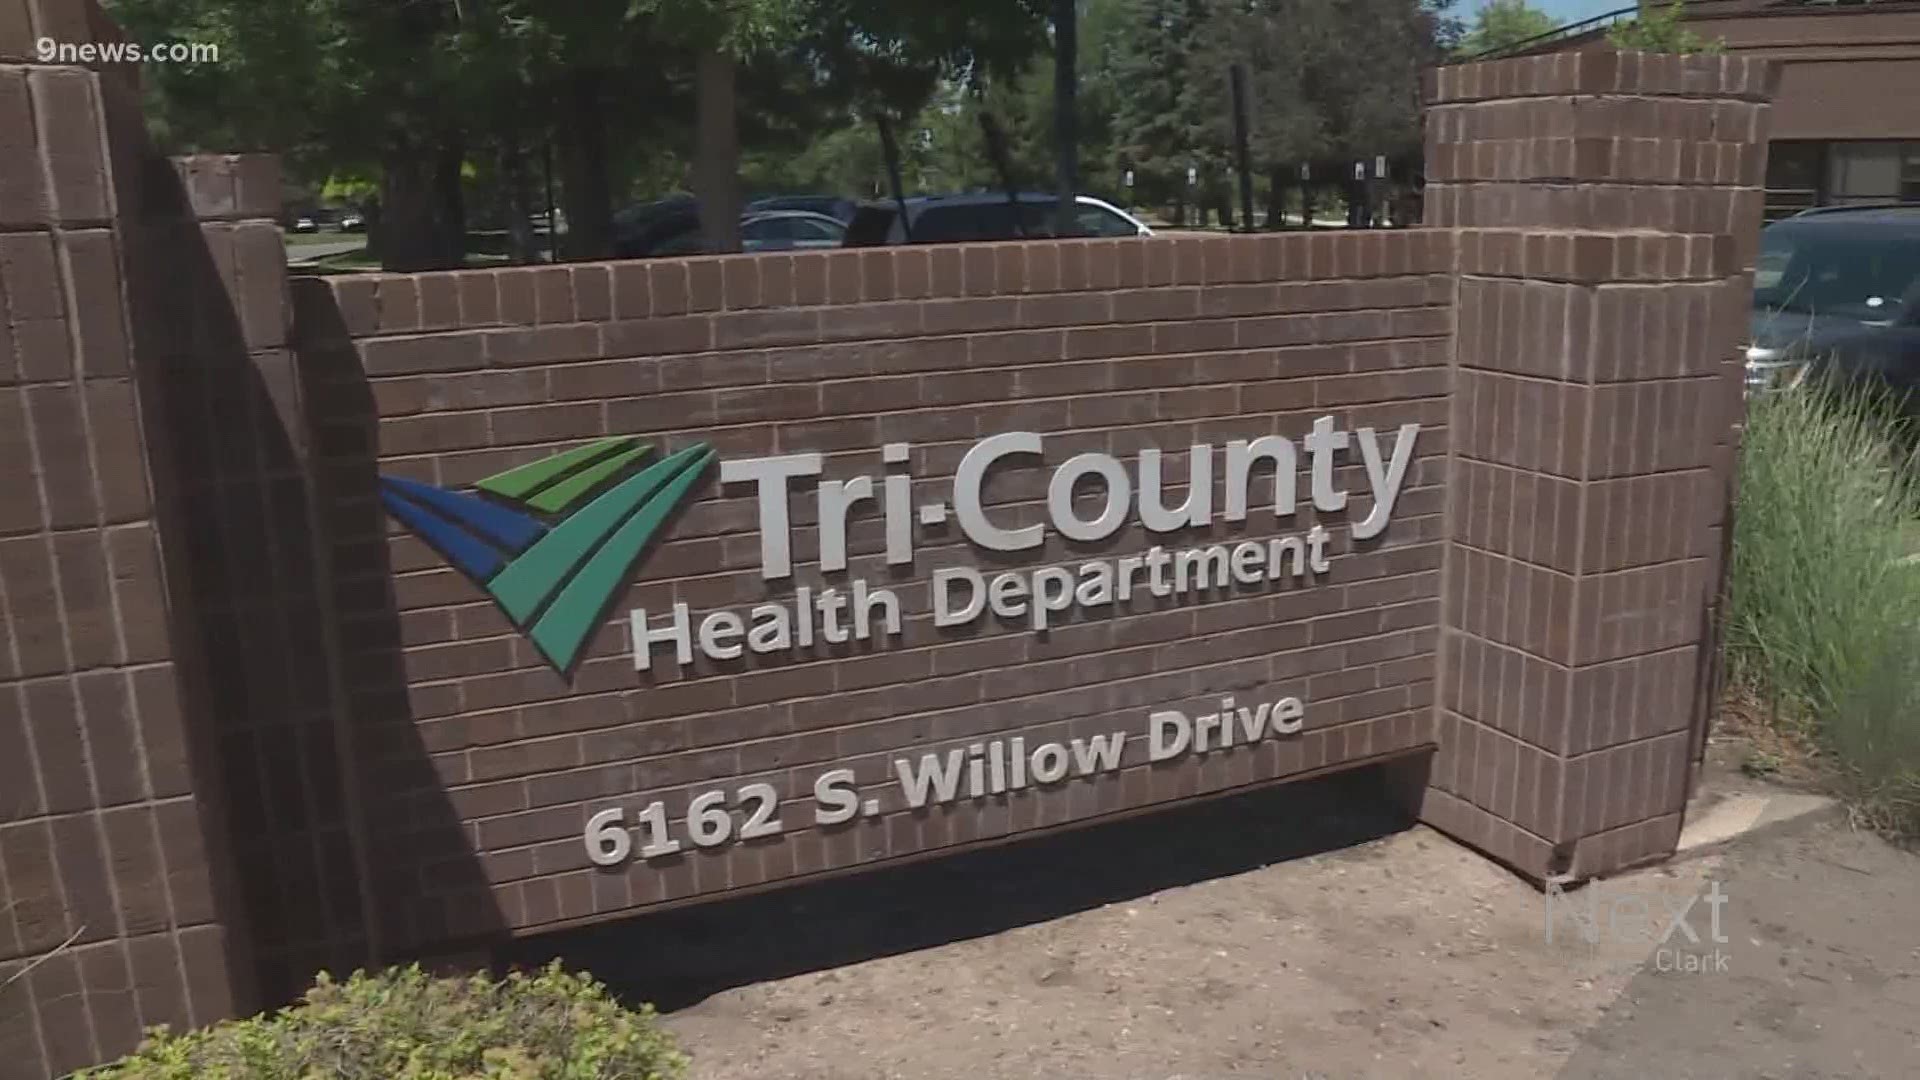 Douglas County joined the Tri-County Health Department in 1965 after Jefferson County left. In 2020, we look at what TCHD does for Douglas, Adams and Arapahoe.